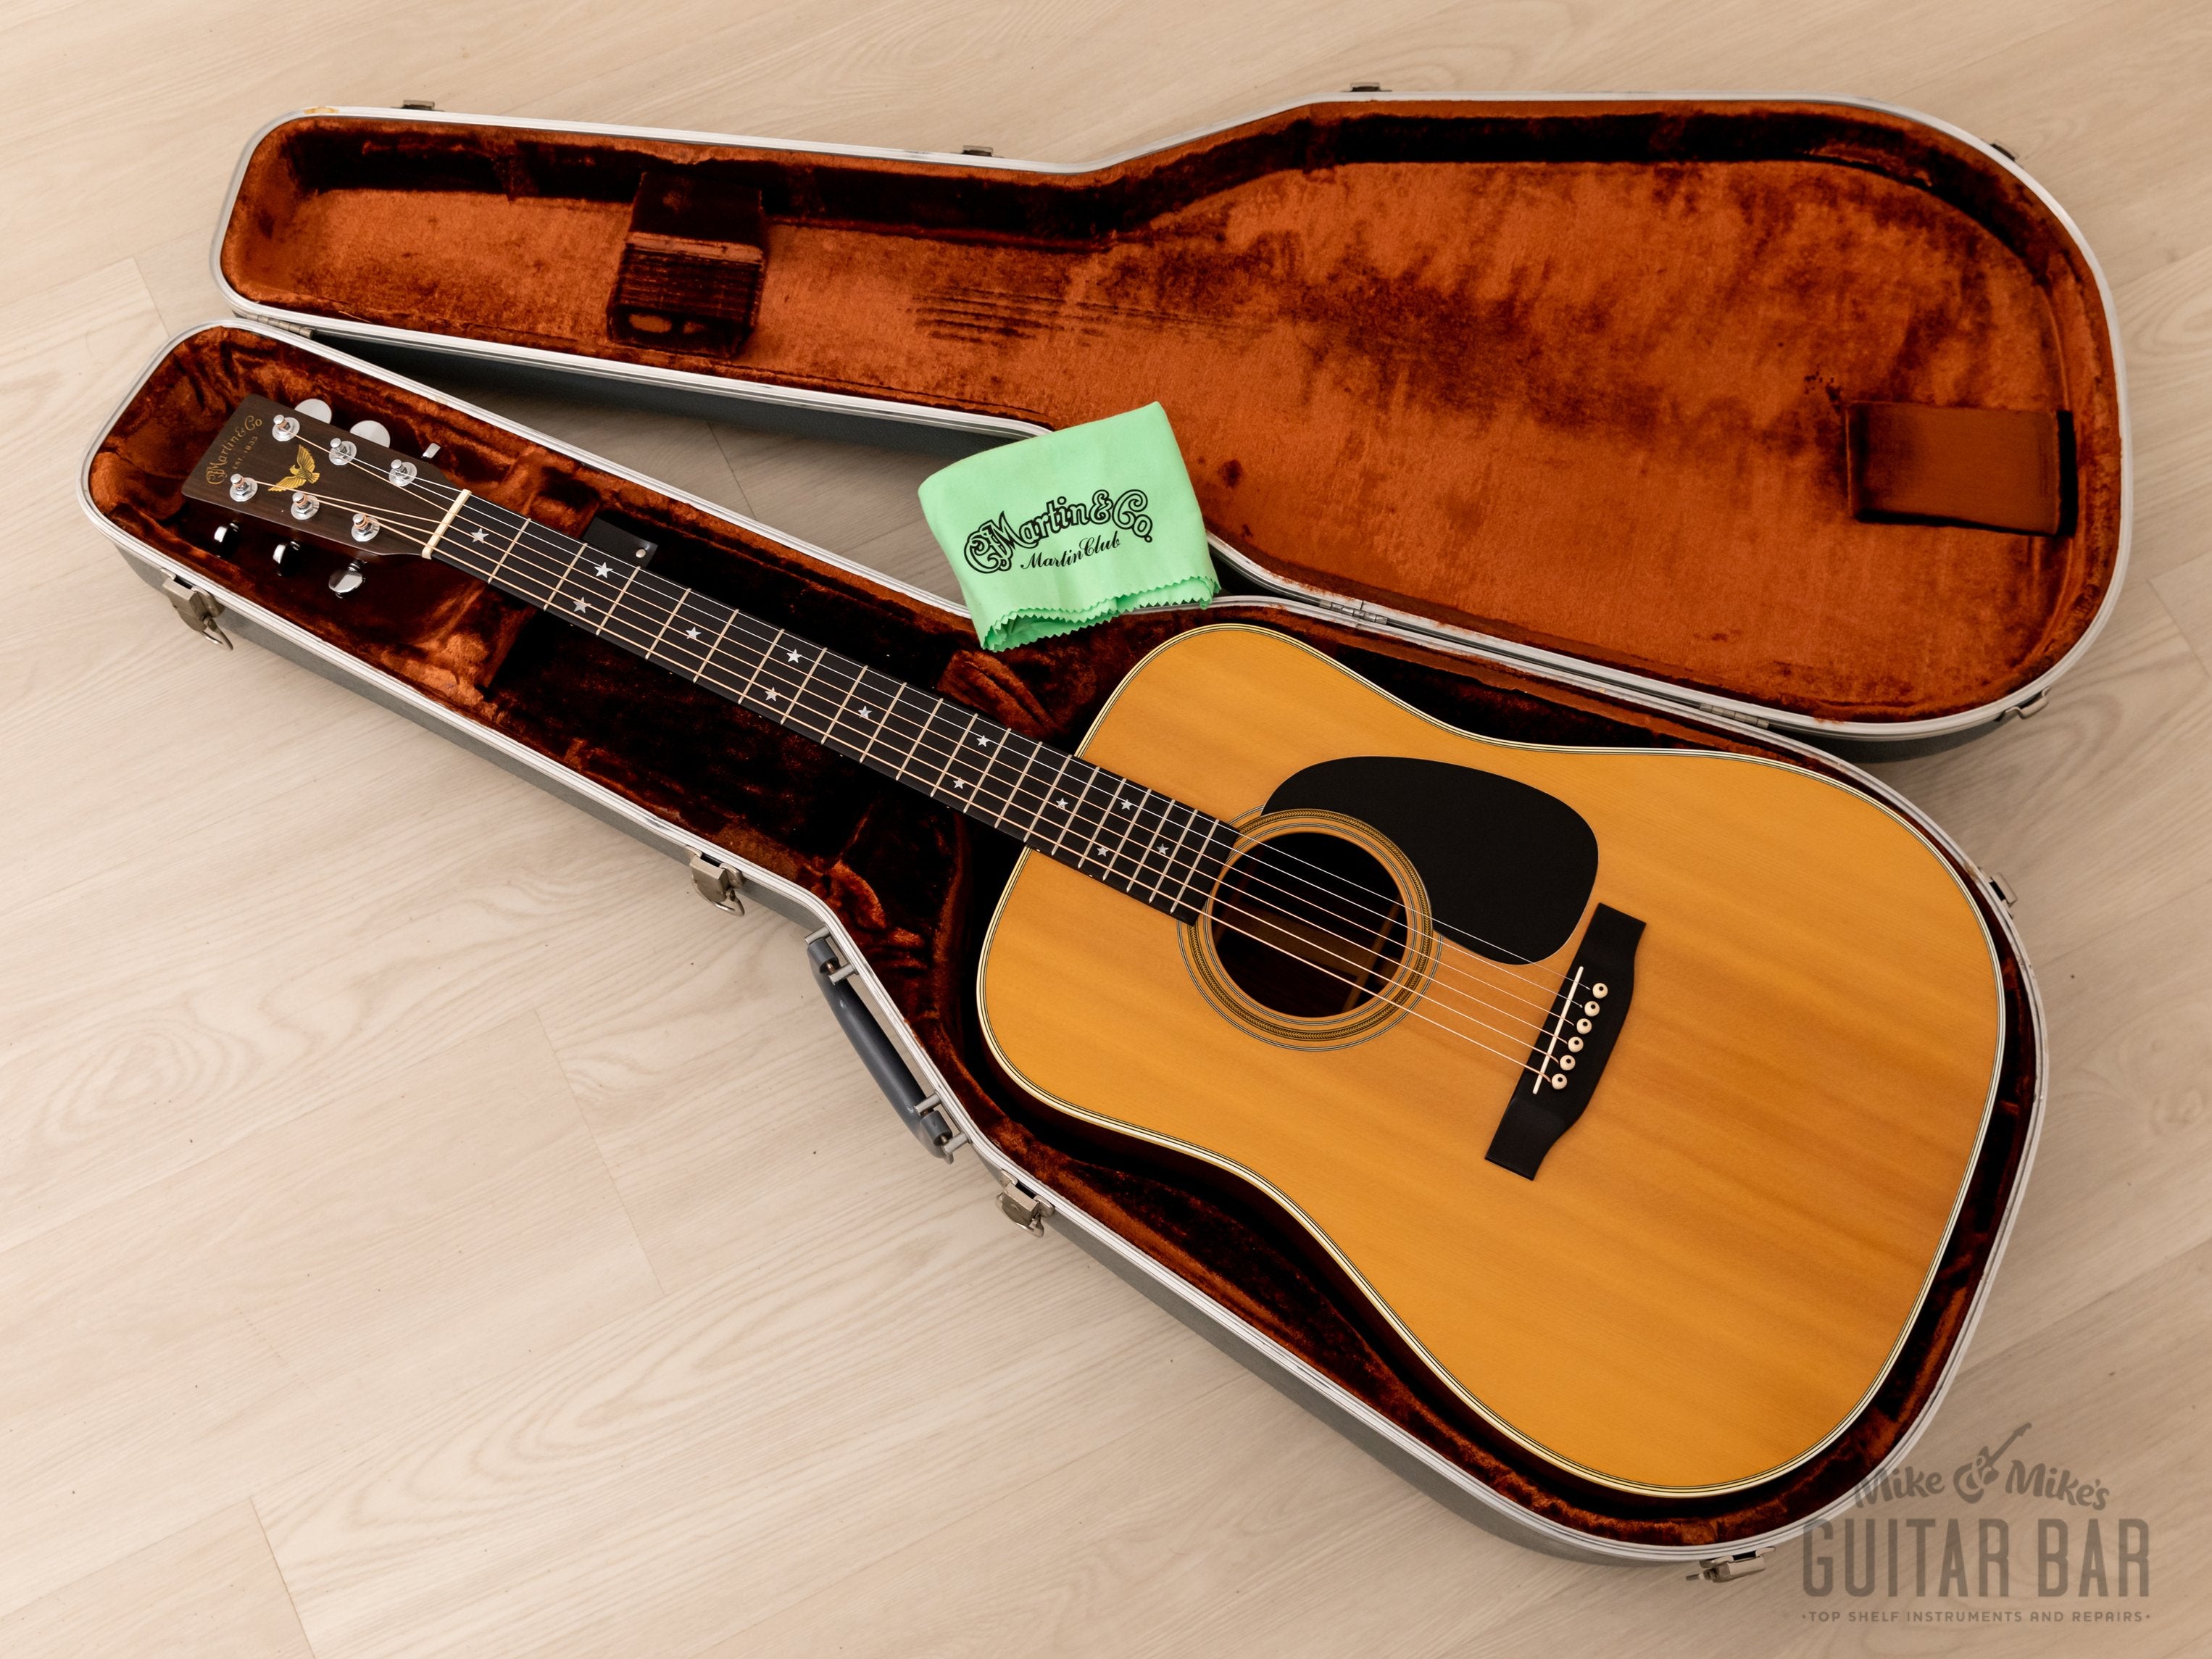 1976 Martin D-76 Vintage Limited Edition Bicentennial Dreadnought Acoustic Guitar w/ Adirondack Top